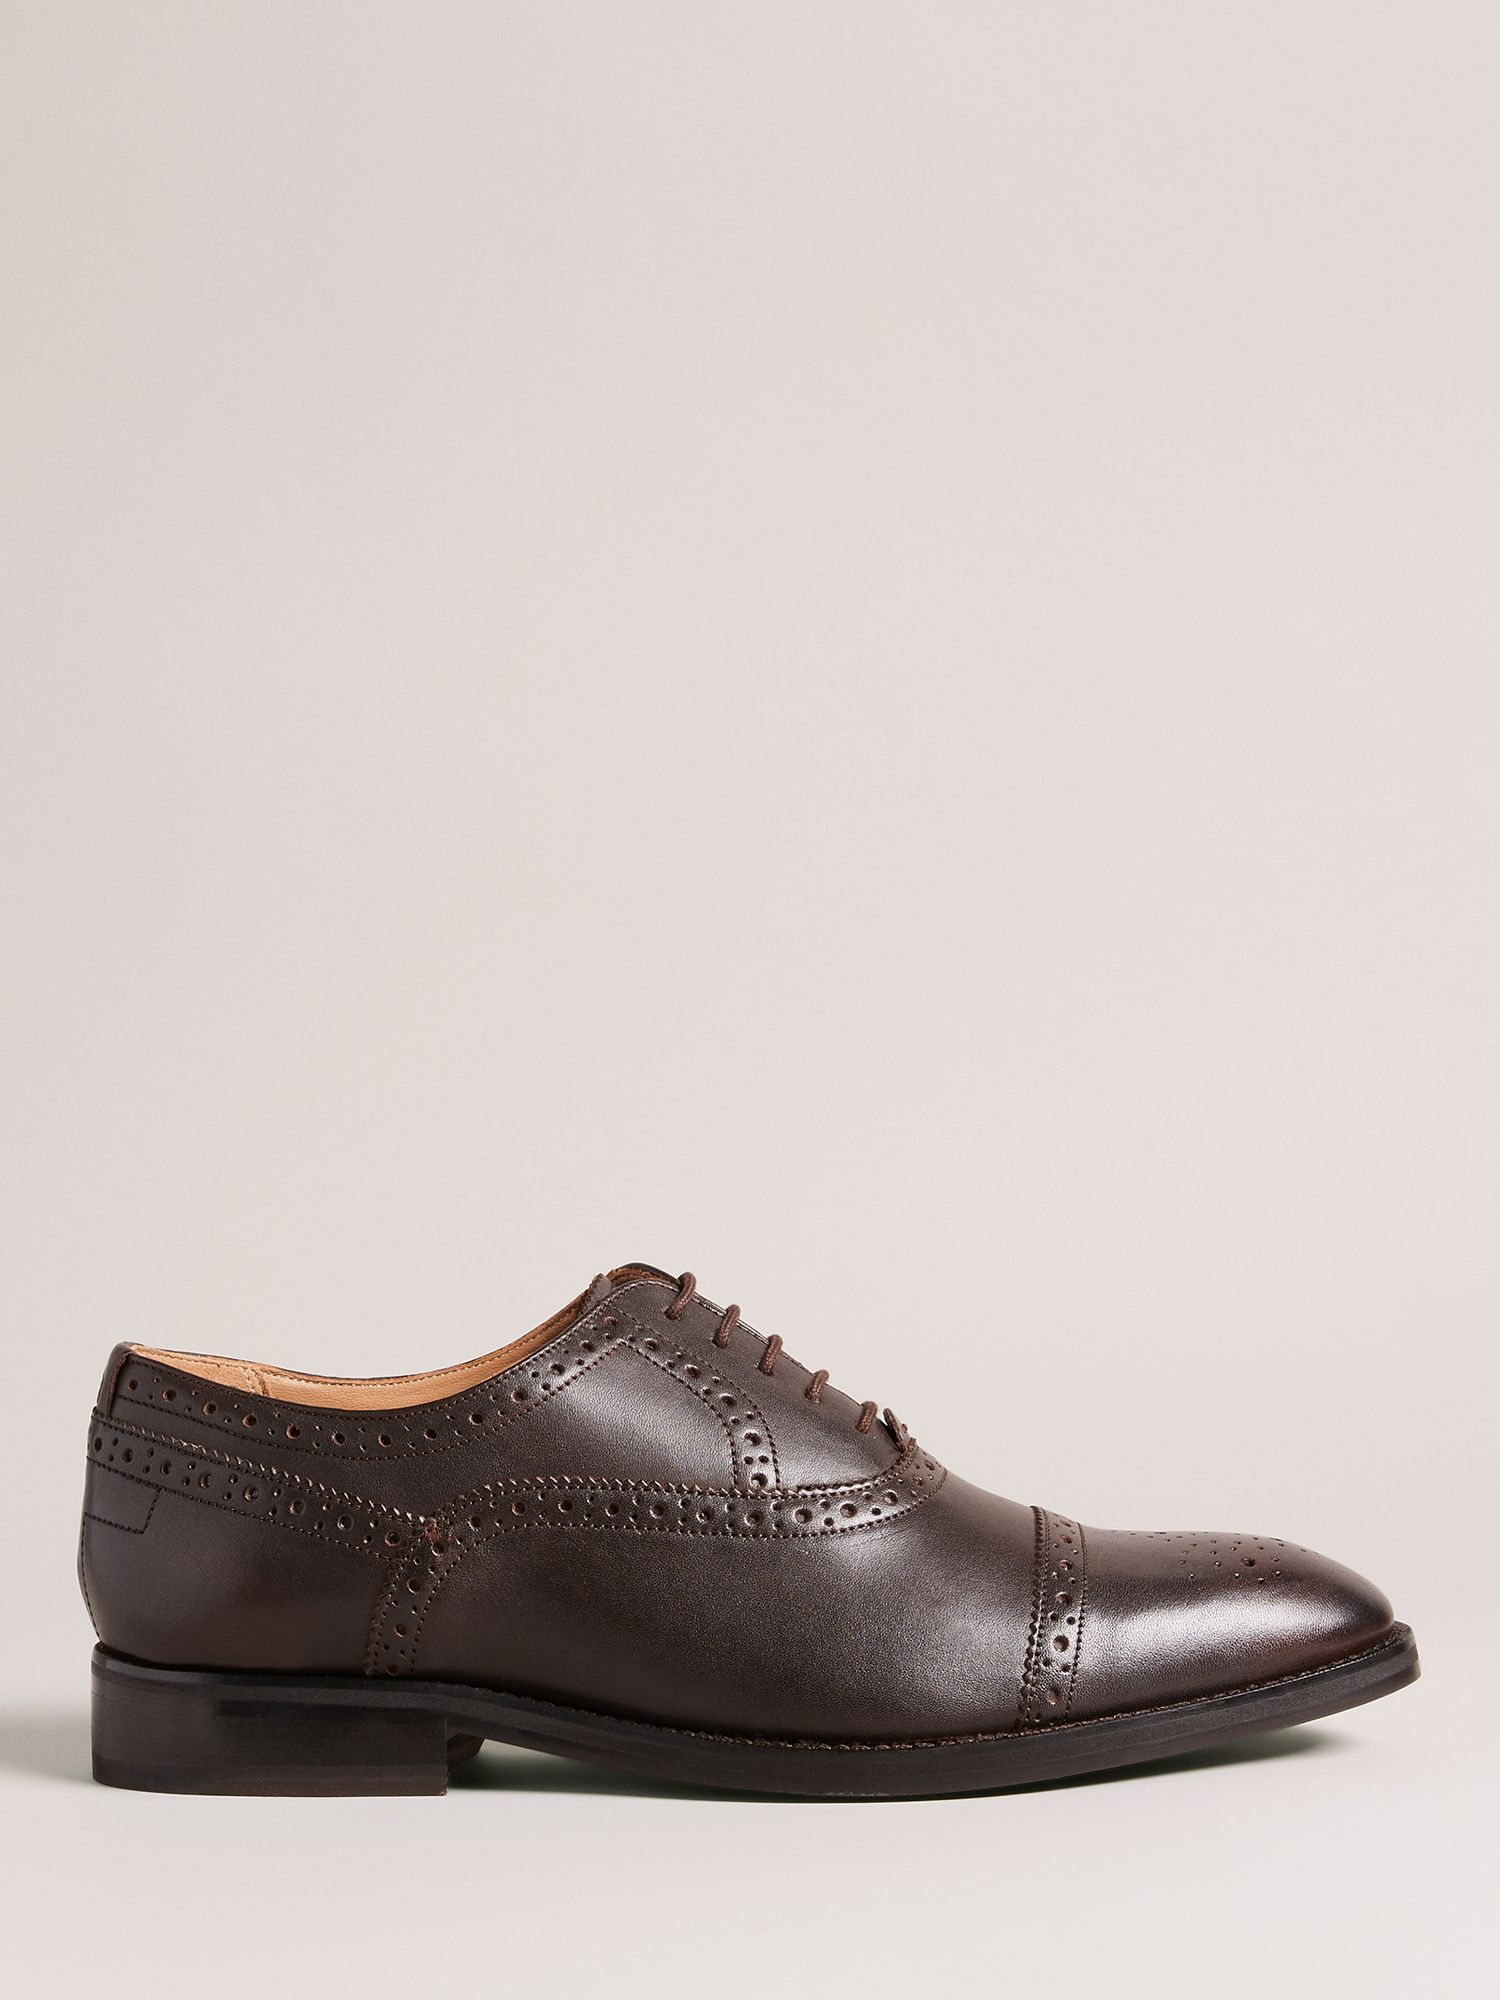 Ted Baker Arnie Leather Oxford Brogues, Brown, EU41